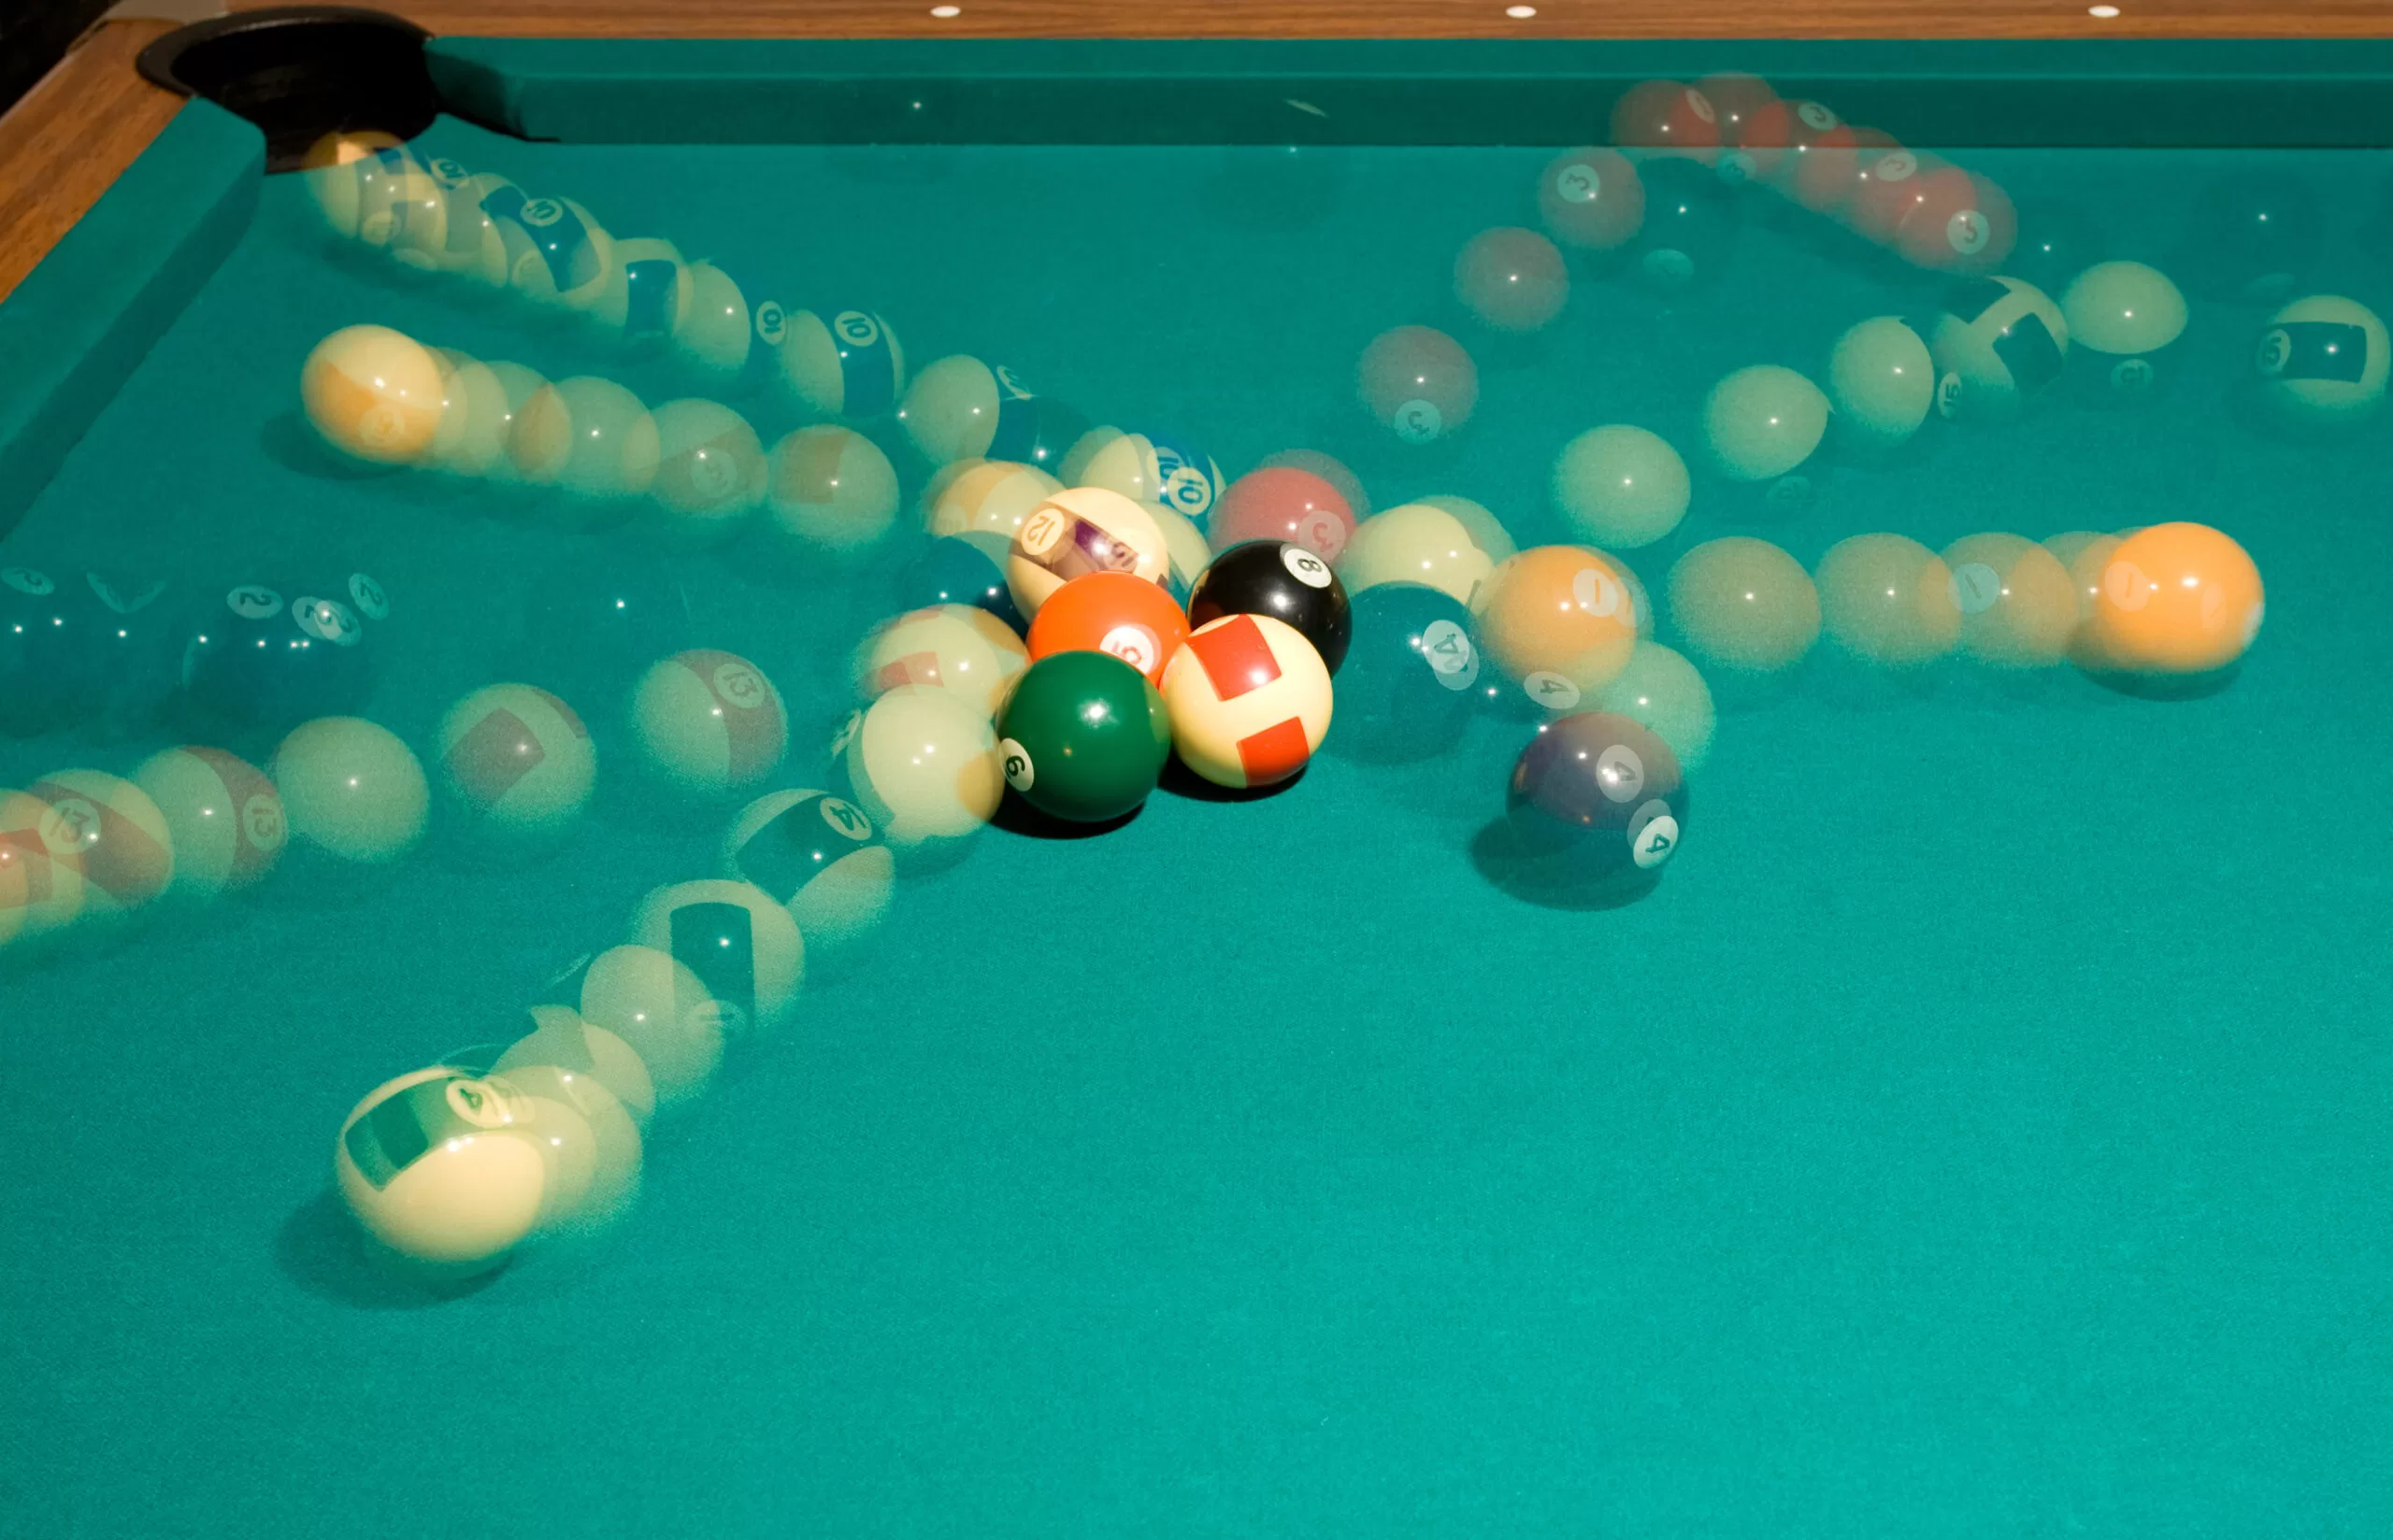 How to play pool in 10 Minutes.